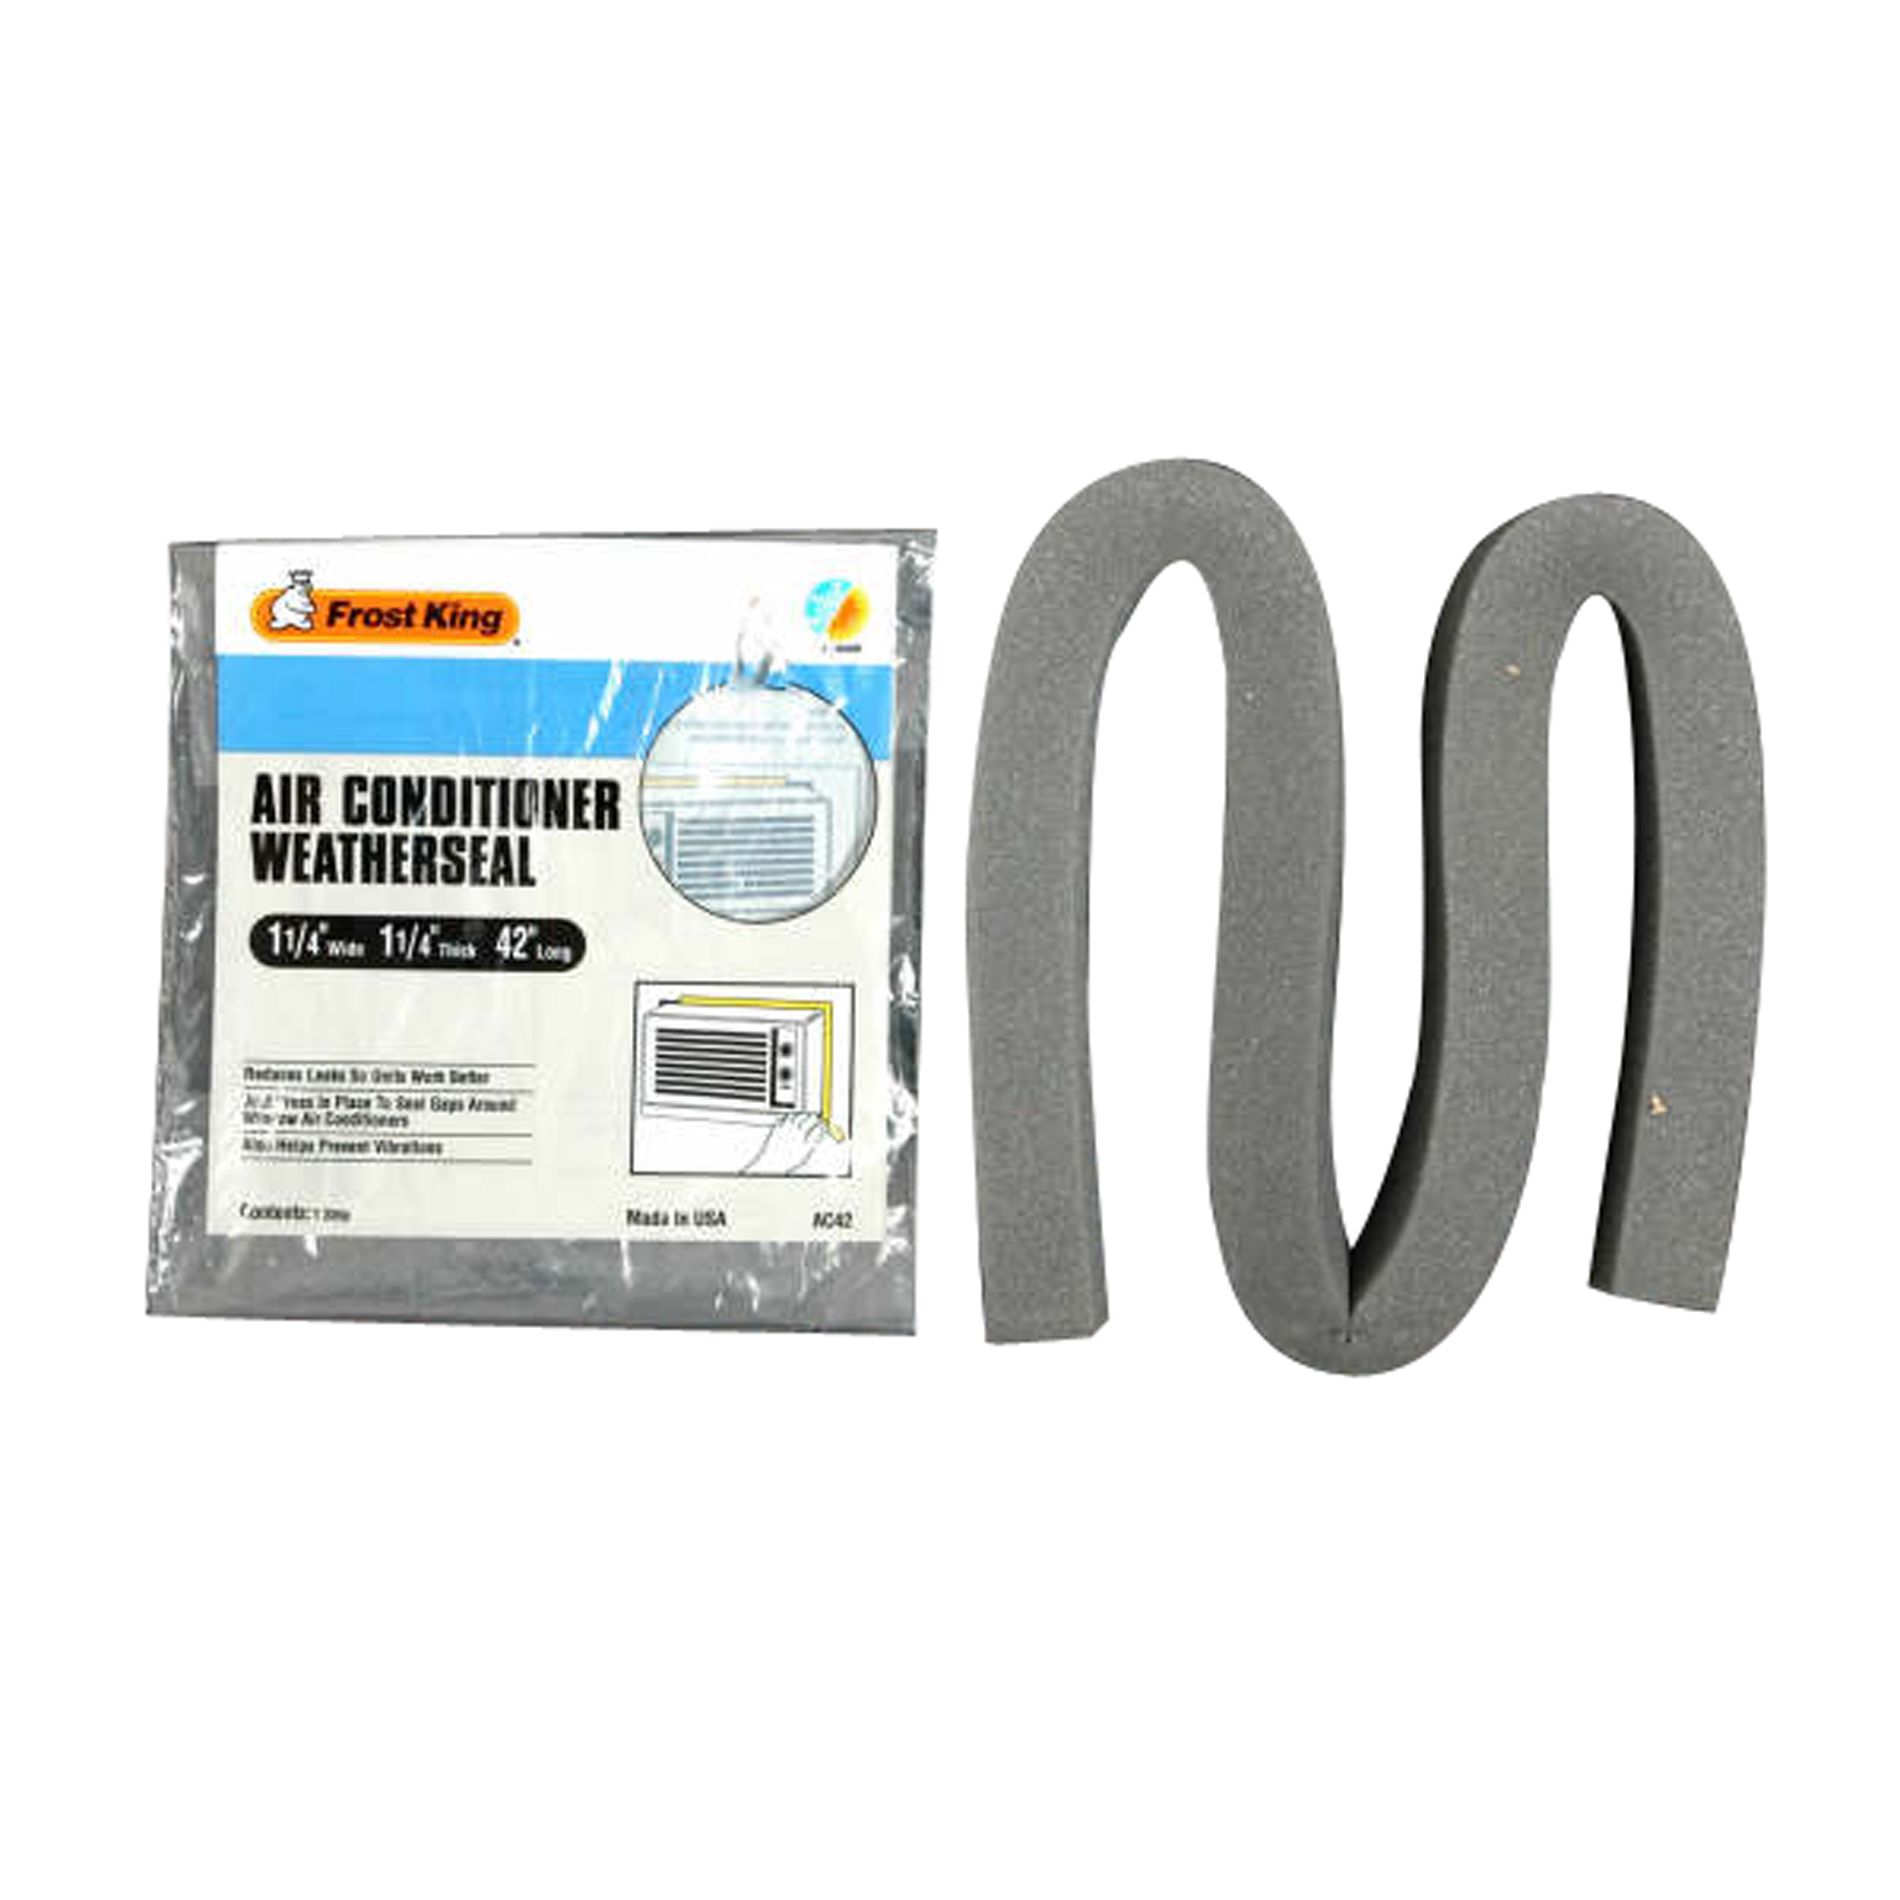 Frost King Air Conditioner Weatherseal, 1-1/4 in. x 42 in. - Gray